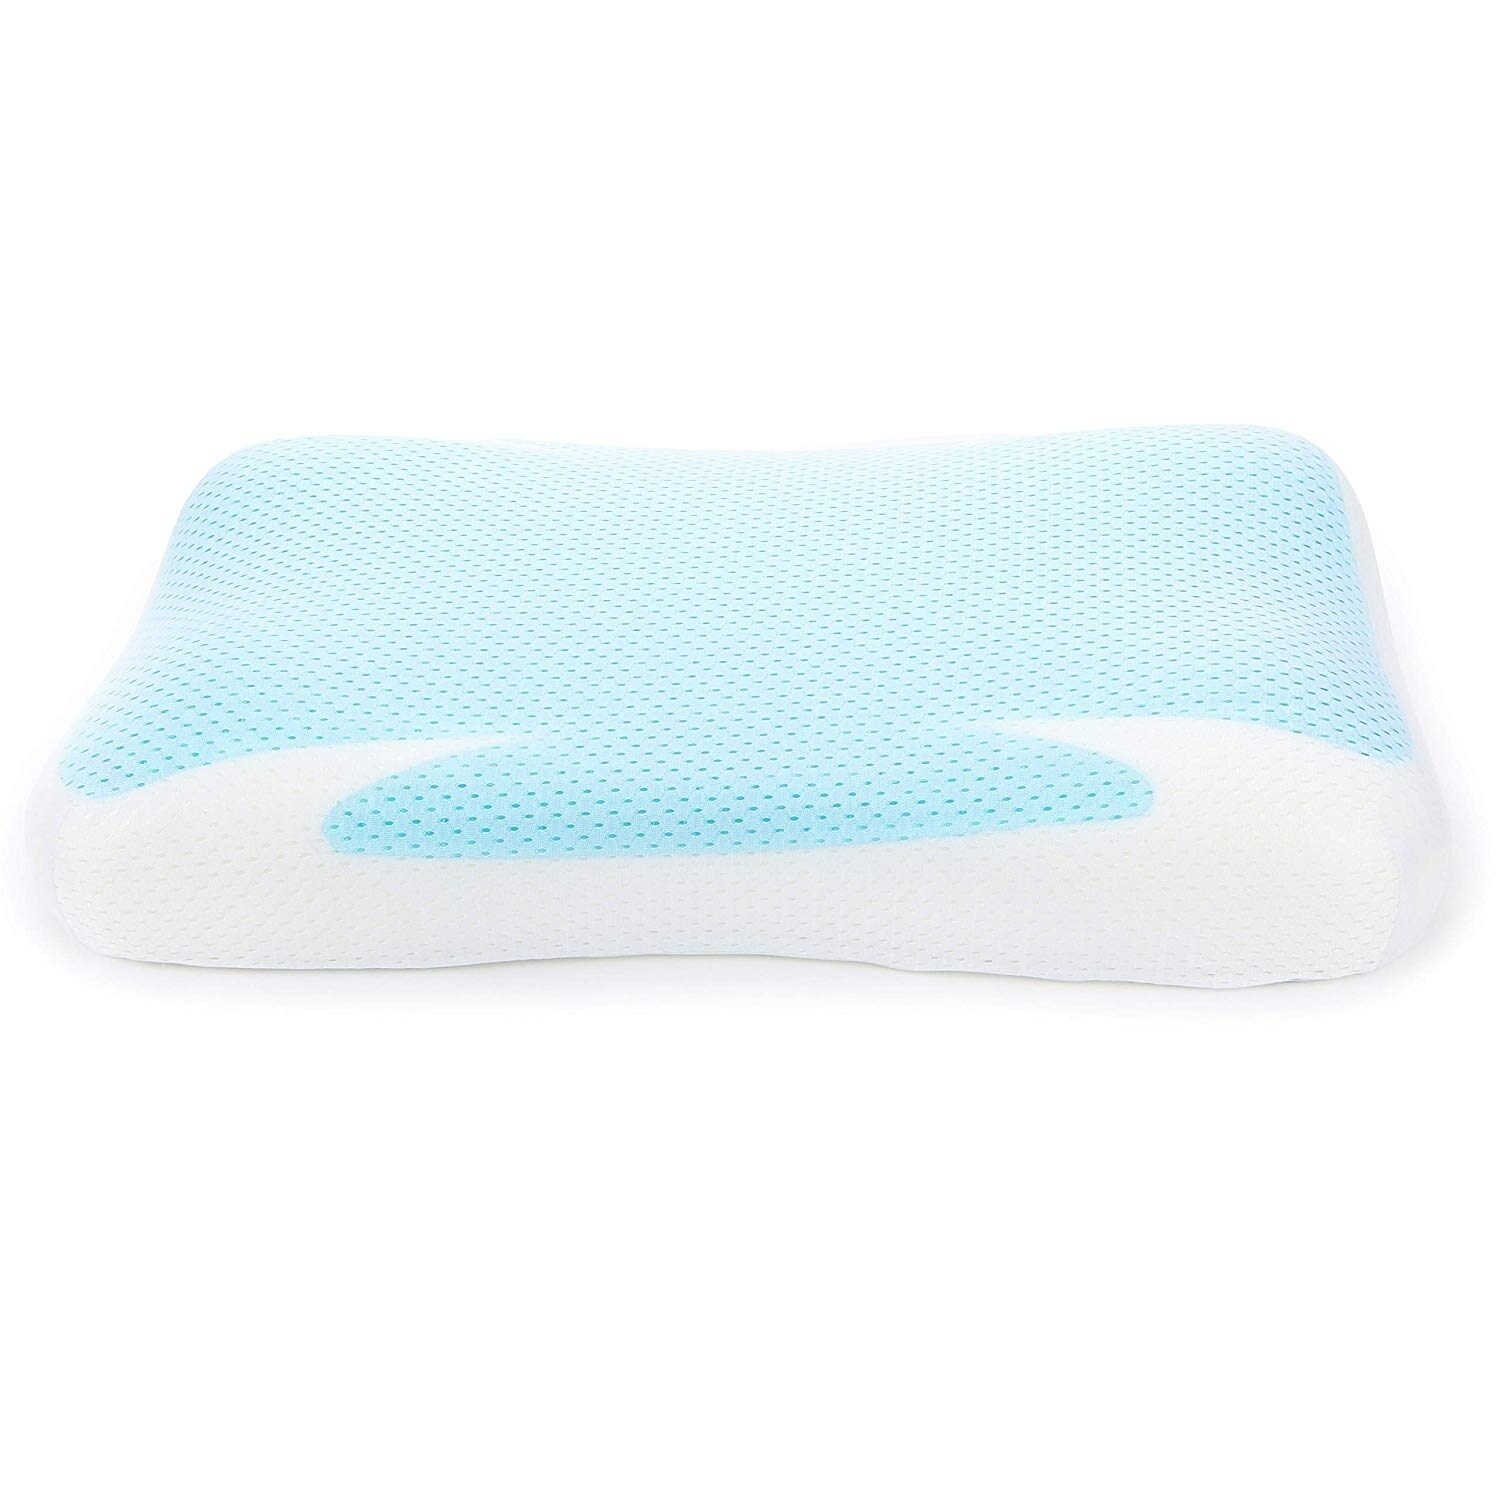 https://ak1.ostkcdn.com/images/products/23118299/Cheer-Collection-Memory-Foam-Ventilated-Cooling-Gel-Pillow-48eb5ed6-d5a3-4e64-92ca-2d950701168b.jpg